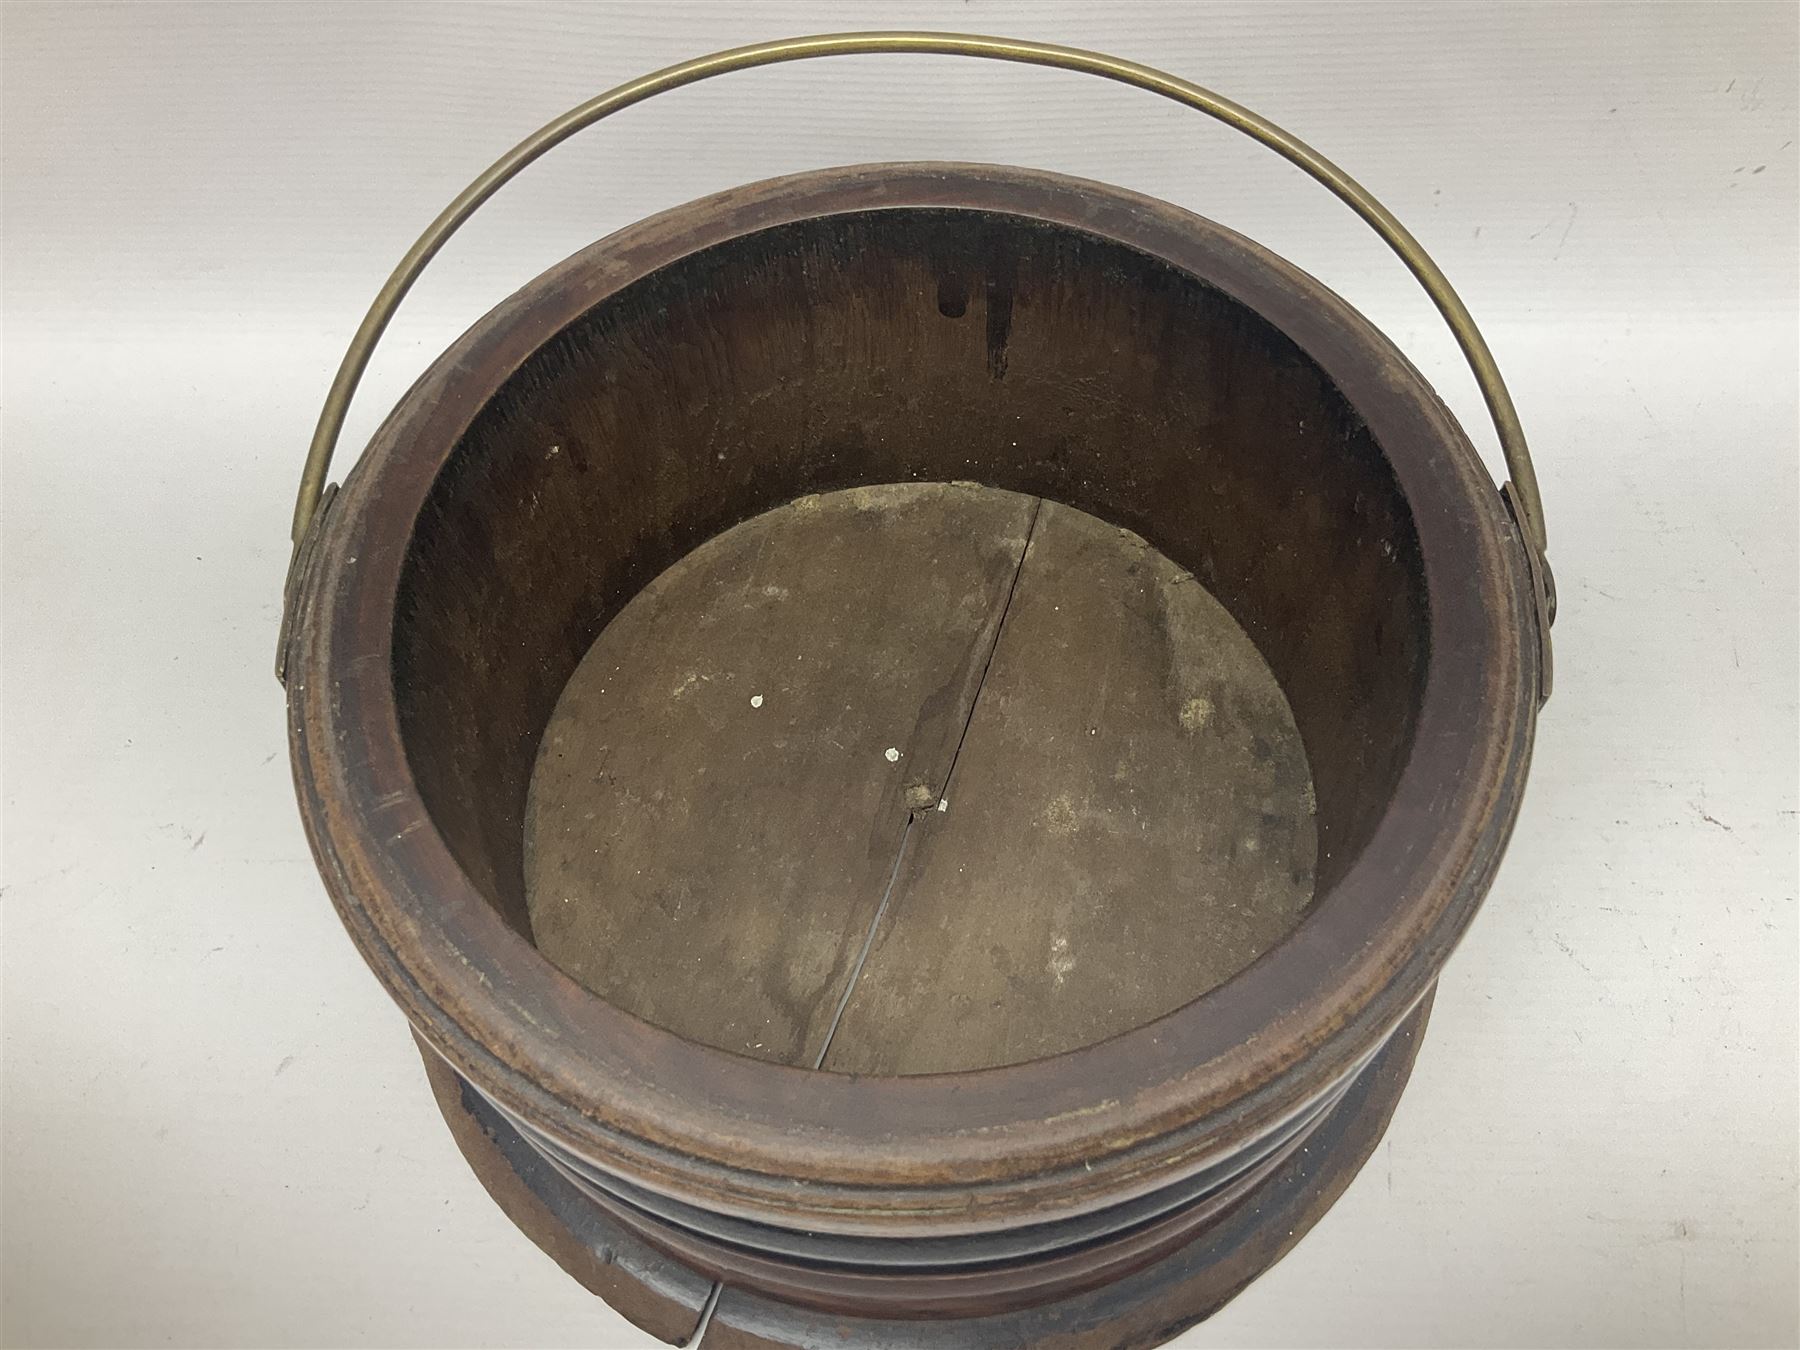 Georgian circular footwarmer with turned wood with decorative ebonised band - Image 3 of 11